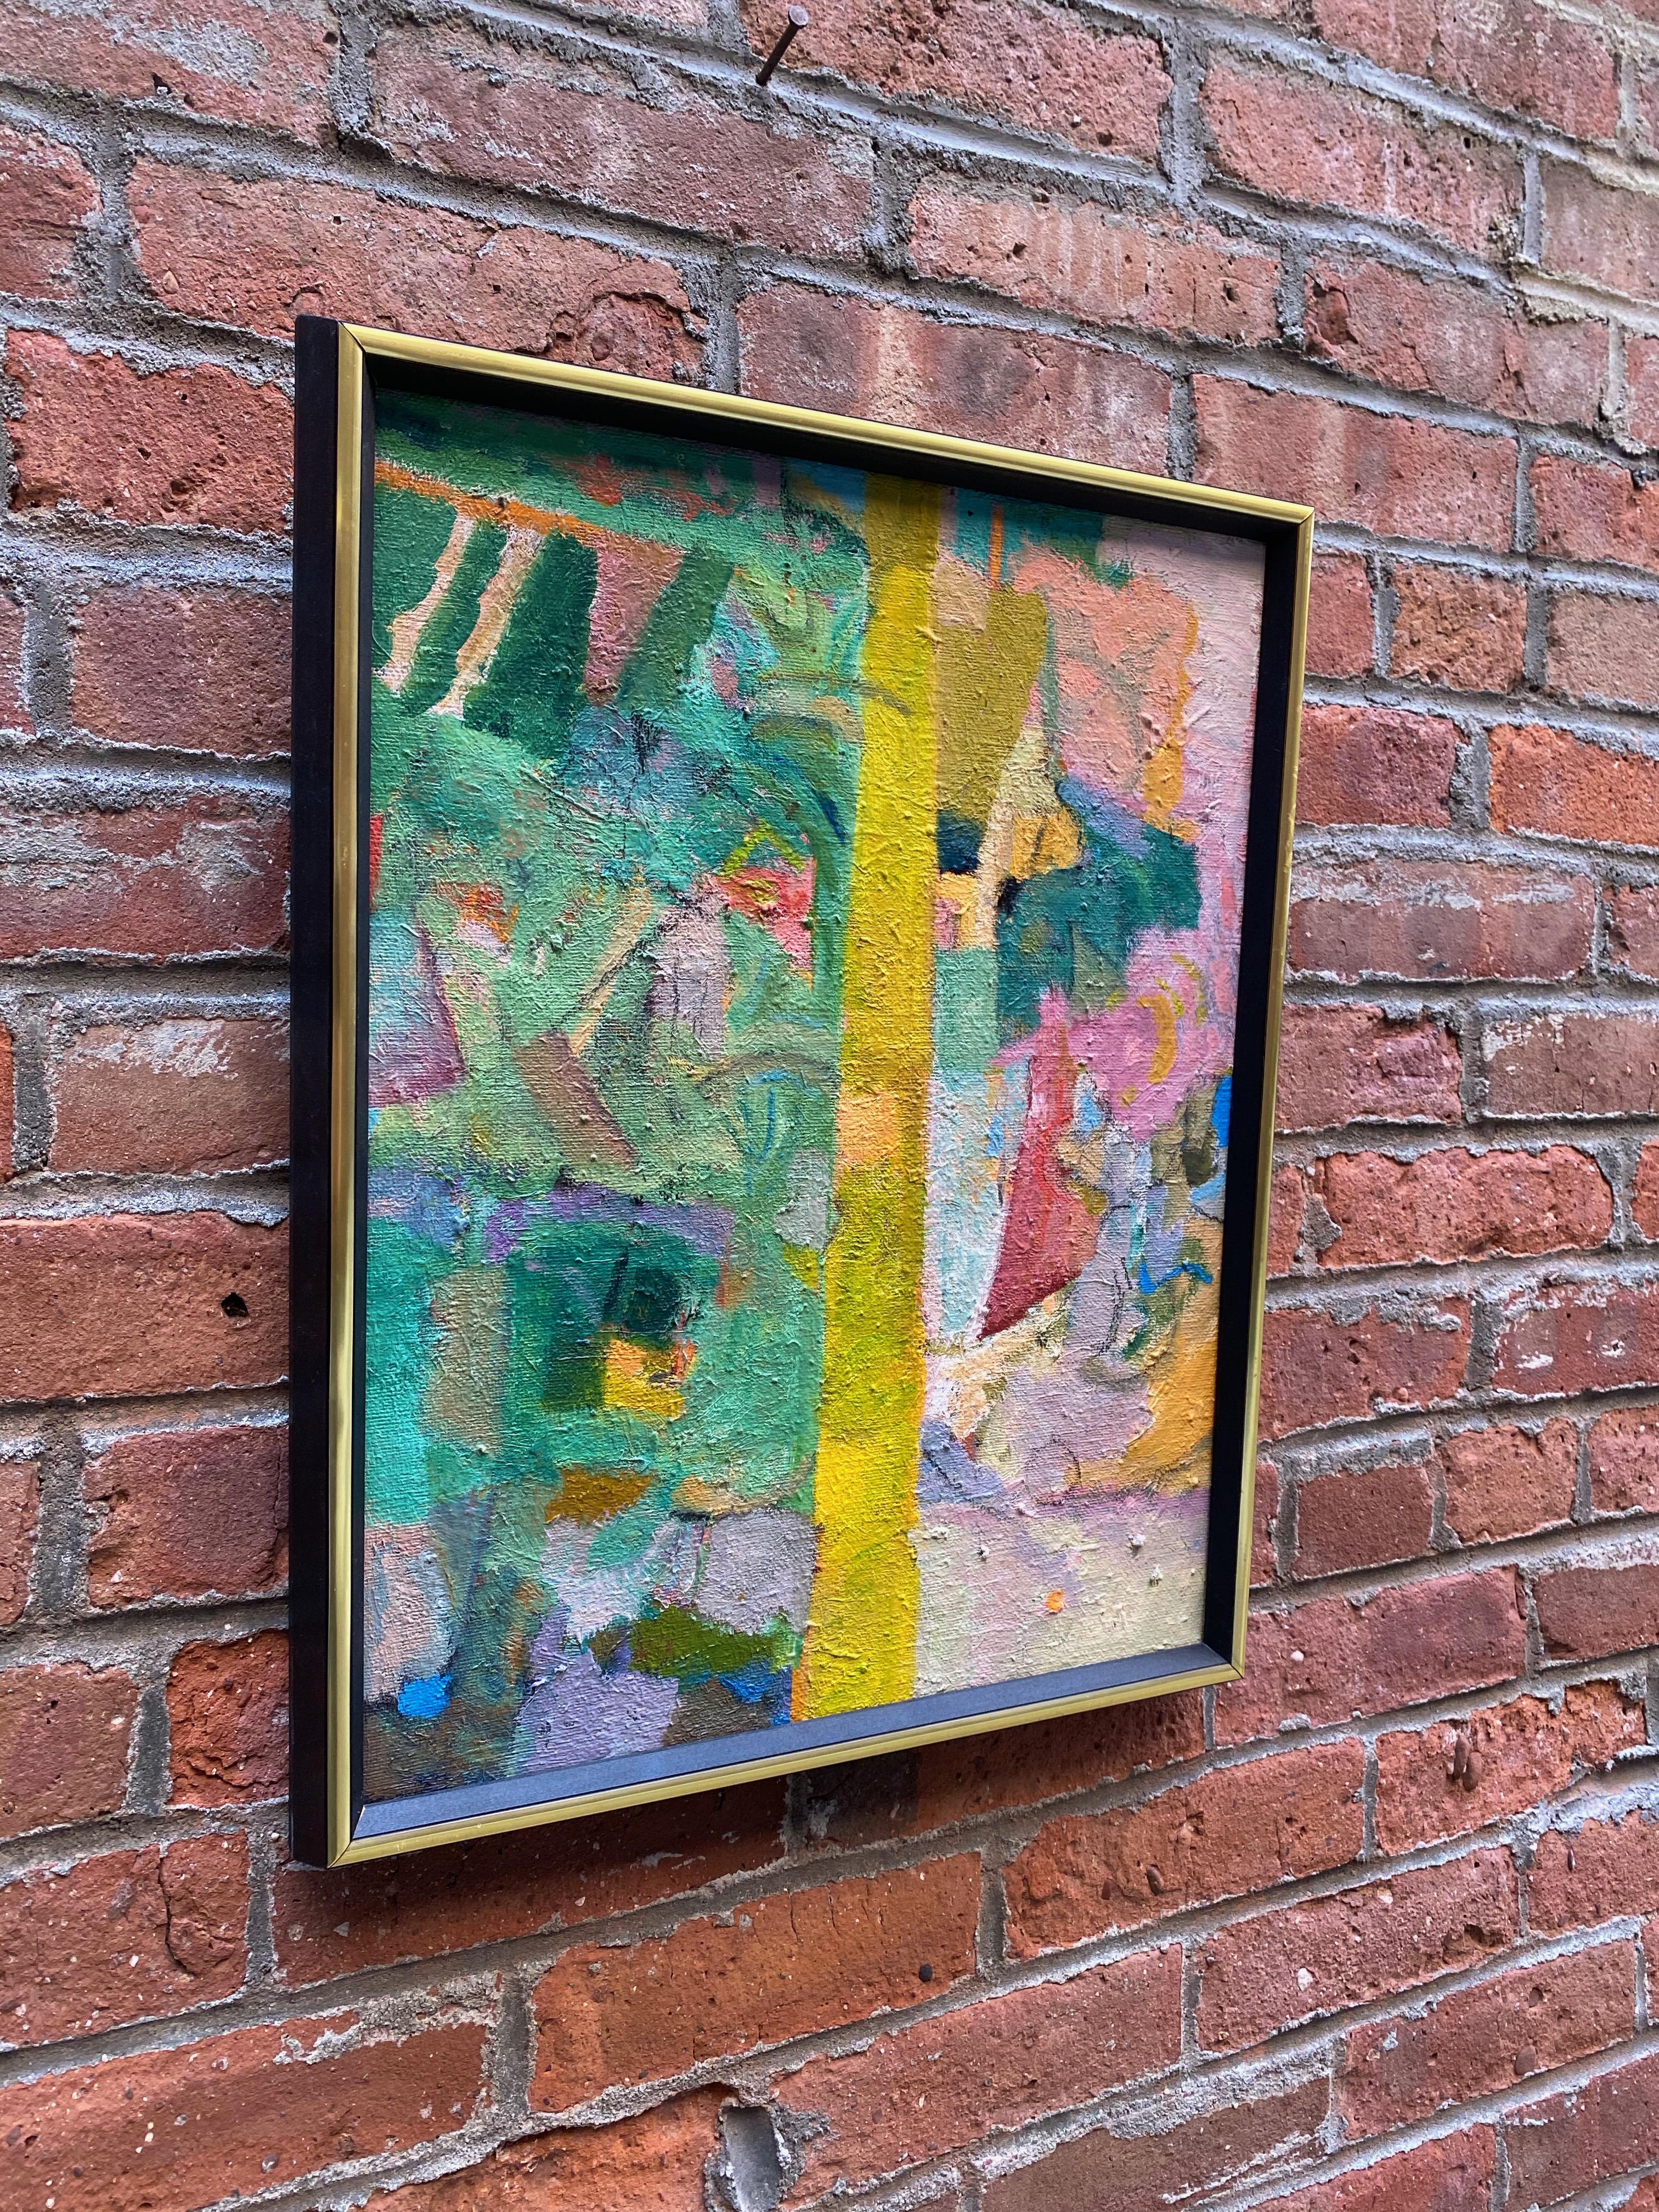 Oil paint on canvas entitled, tapestry figures, circa 1970-1971. Wonderfully worked canvas with a colorfully vibrant pastel palette. Good condition with no visible rips, tears, foxing, crazing or restorations. The framing treatment consists of a